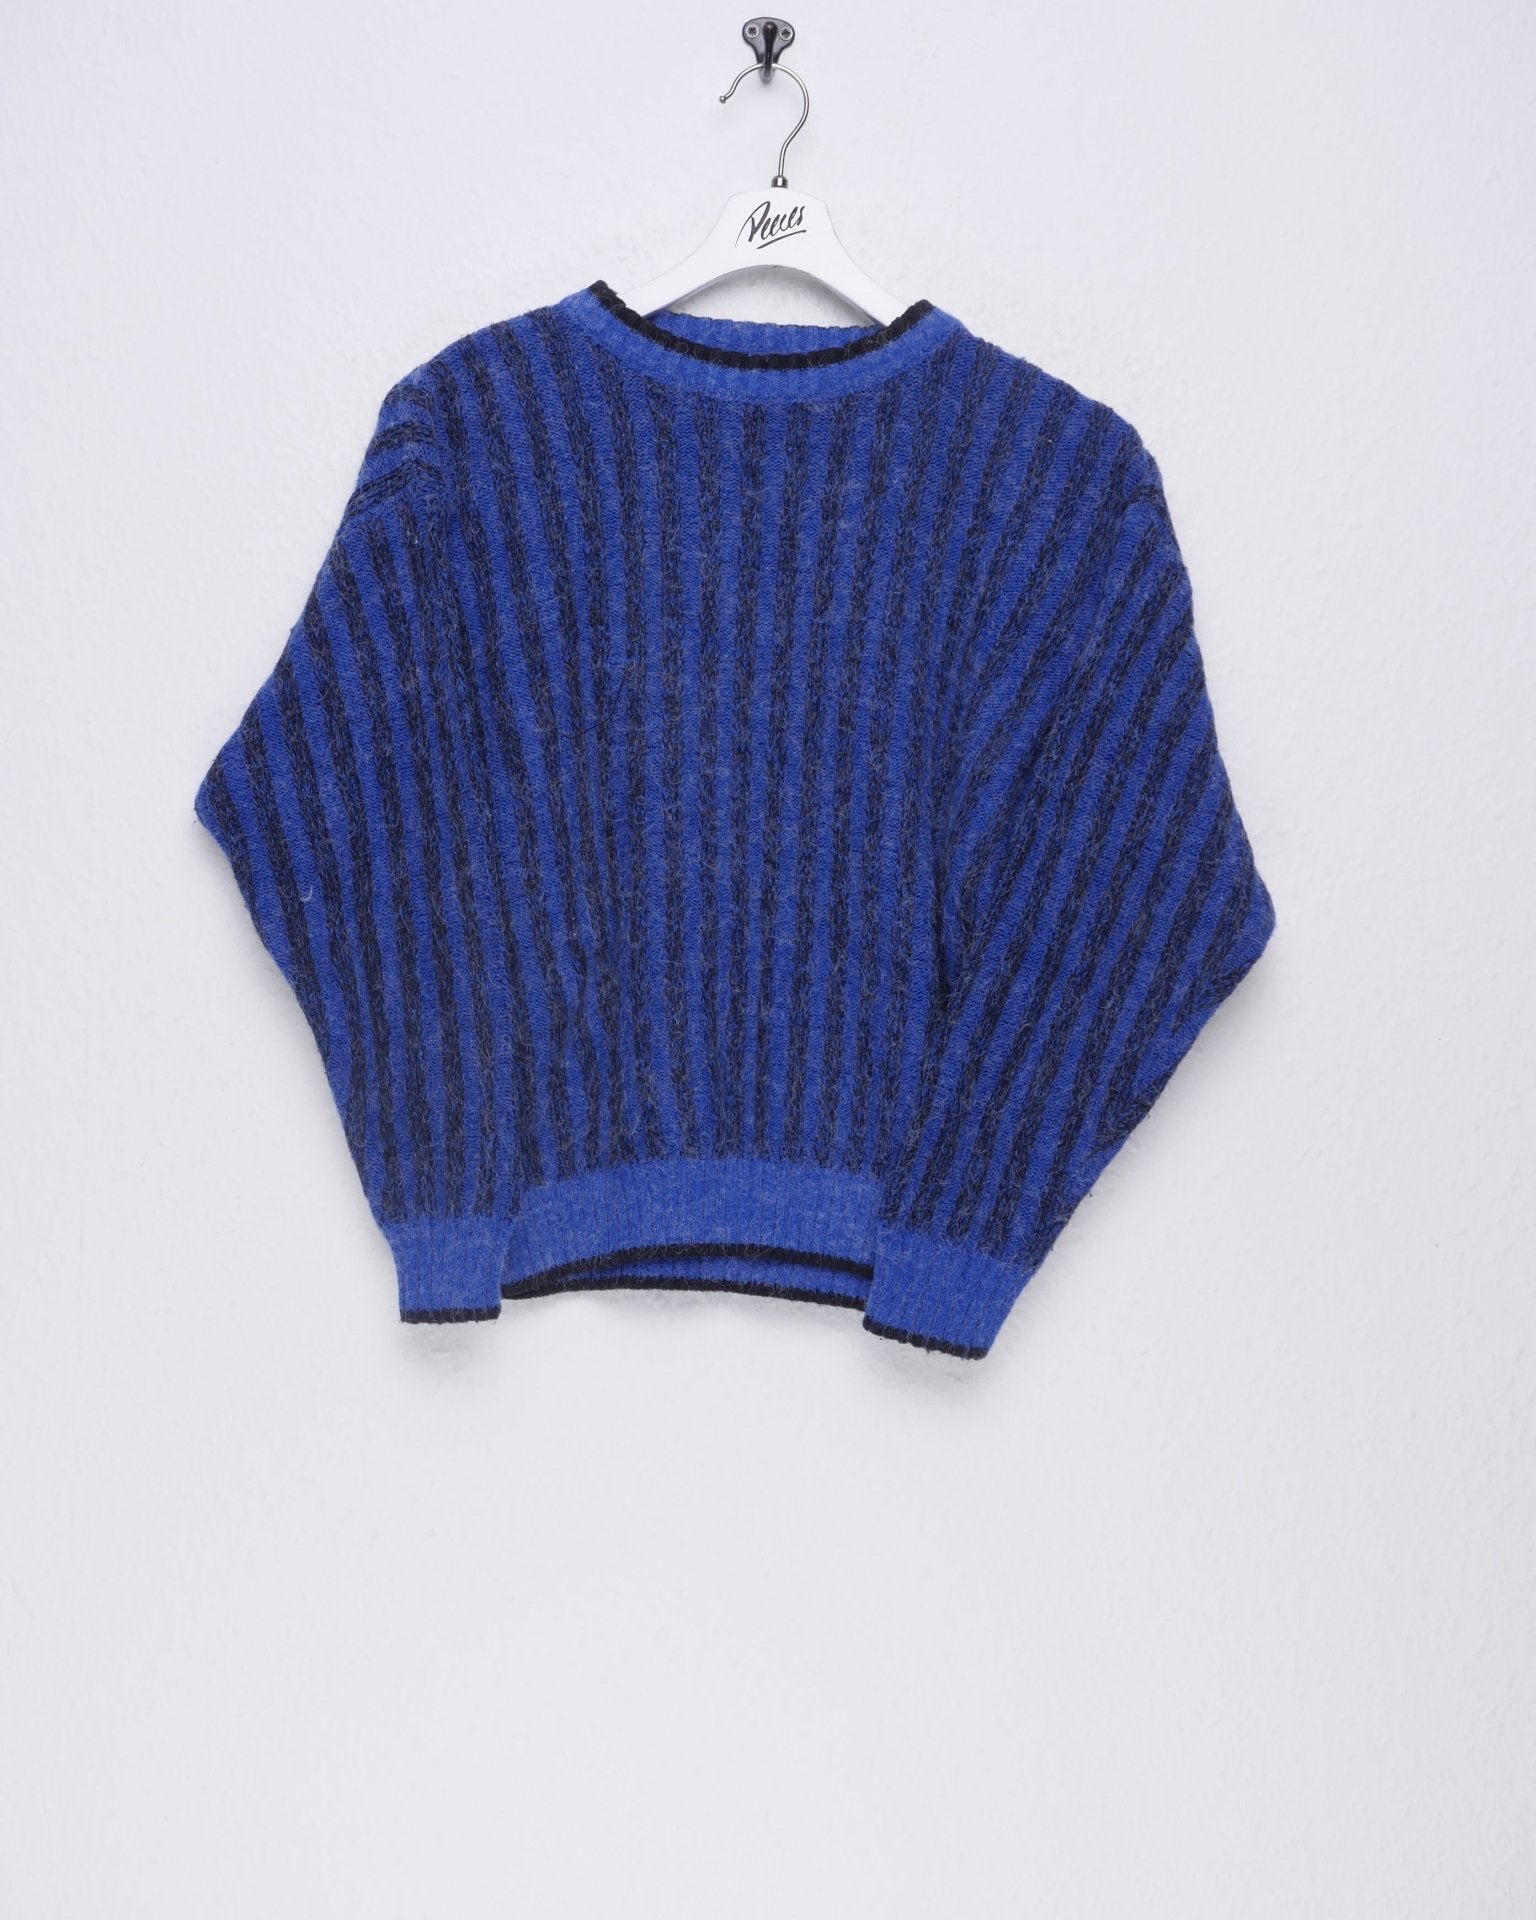 Two Toned striped Vintage wool Sweater - Peeces